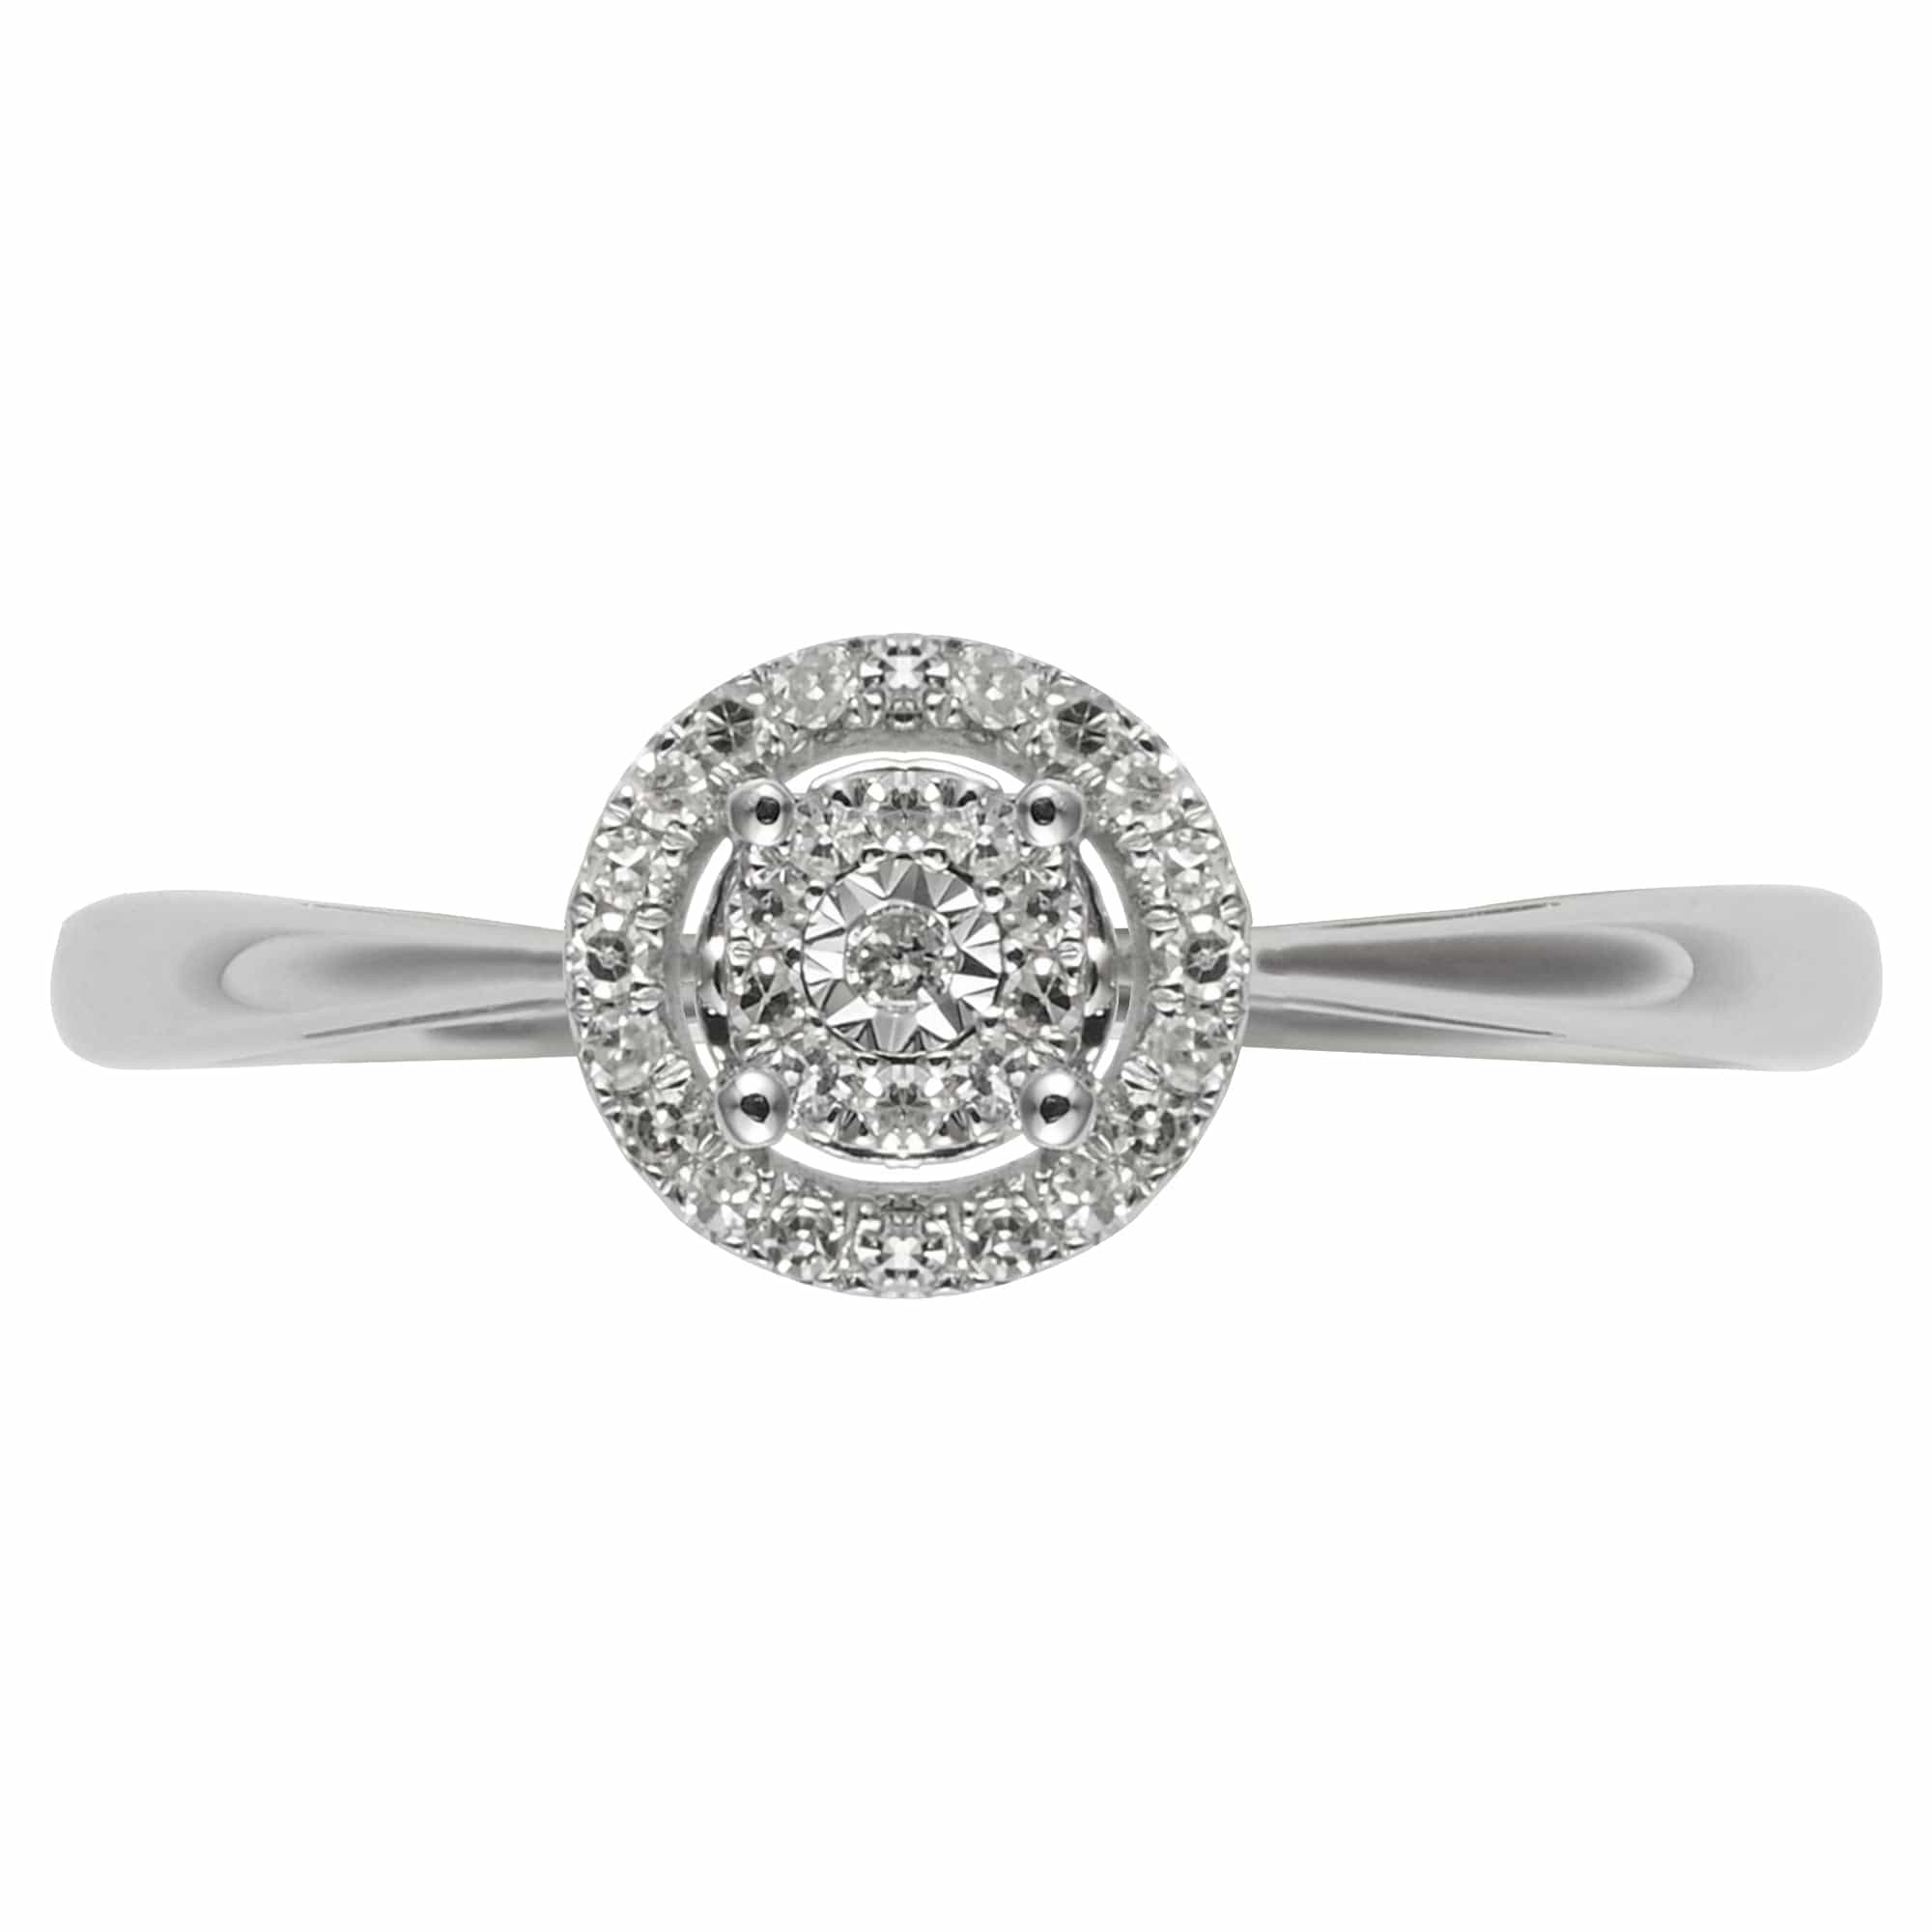 45331R002 Classic Round Diamond Cluster Ring in 9ct White Gold 2